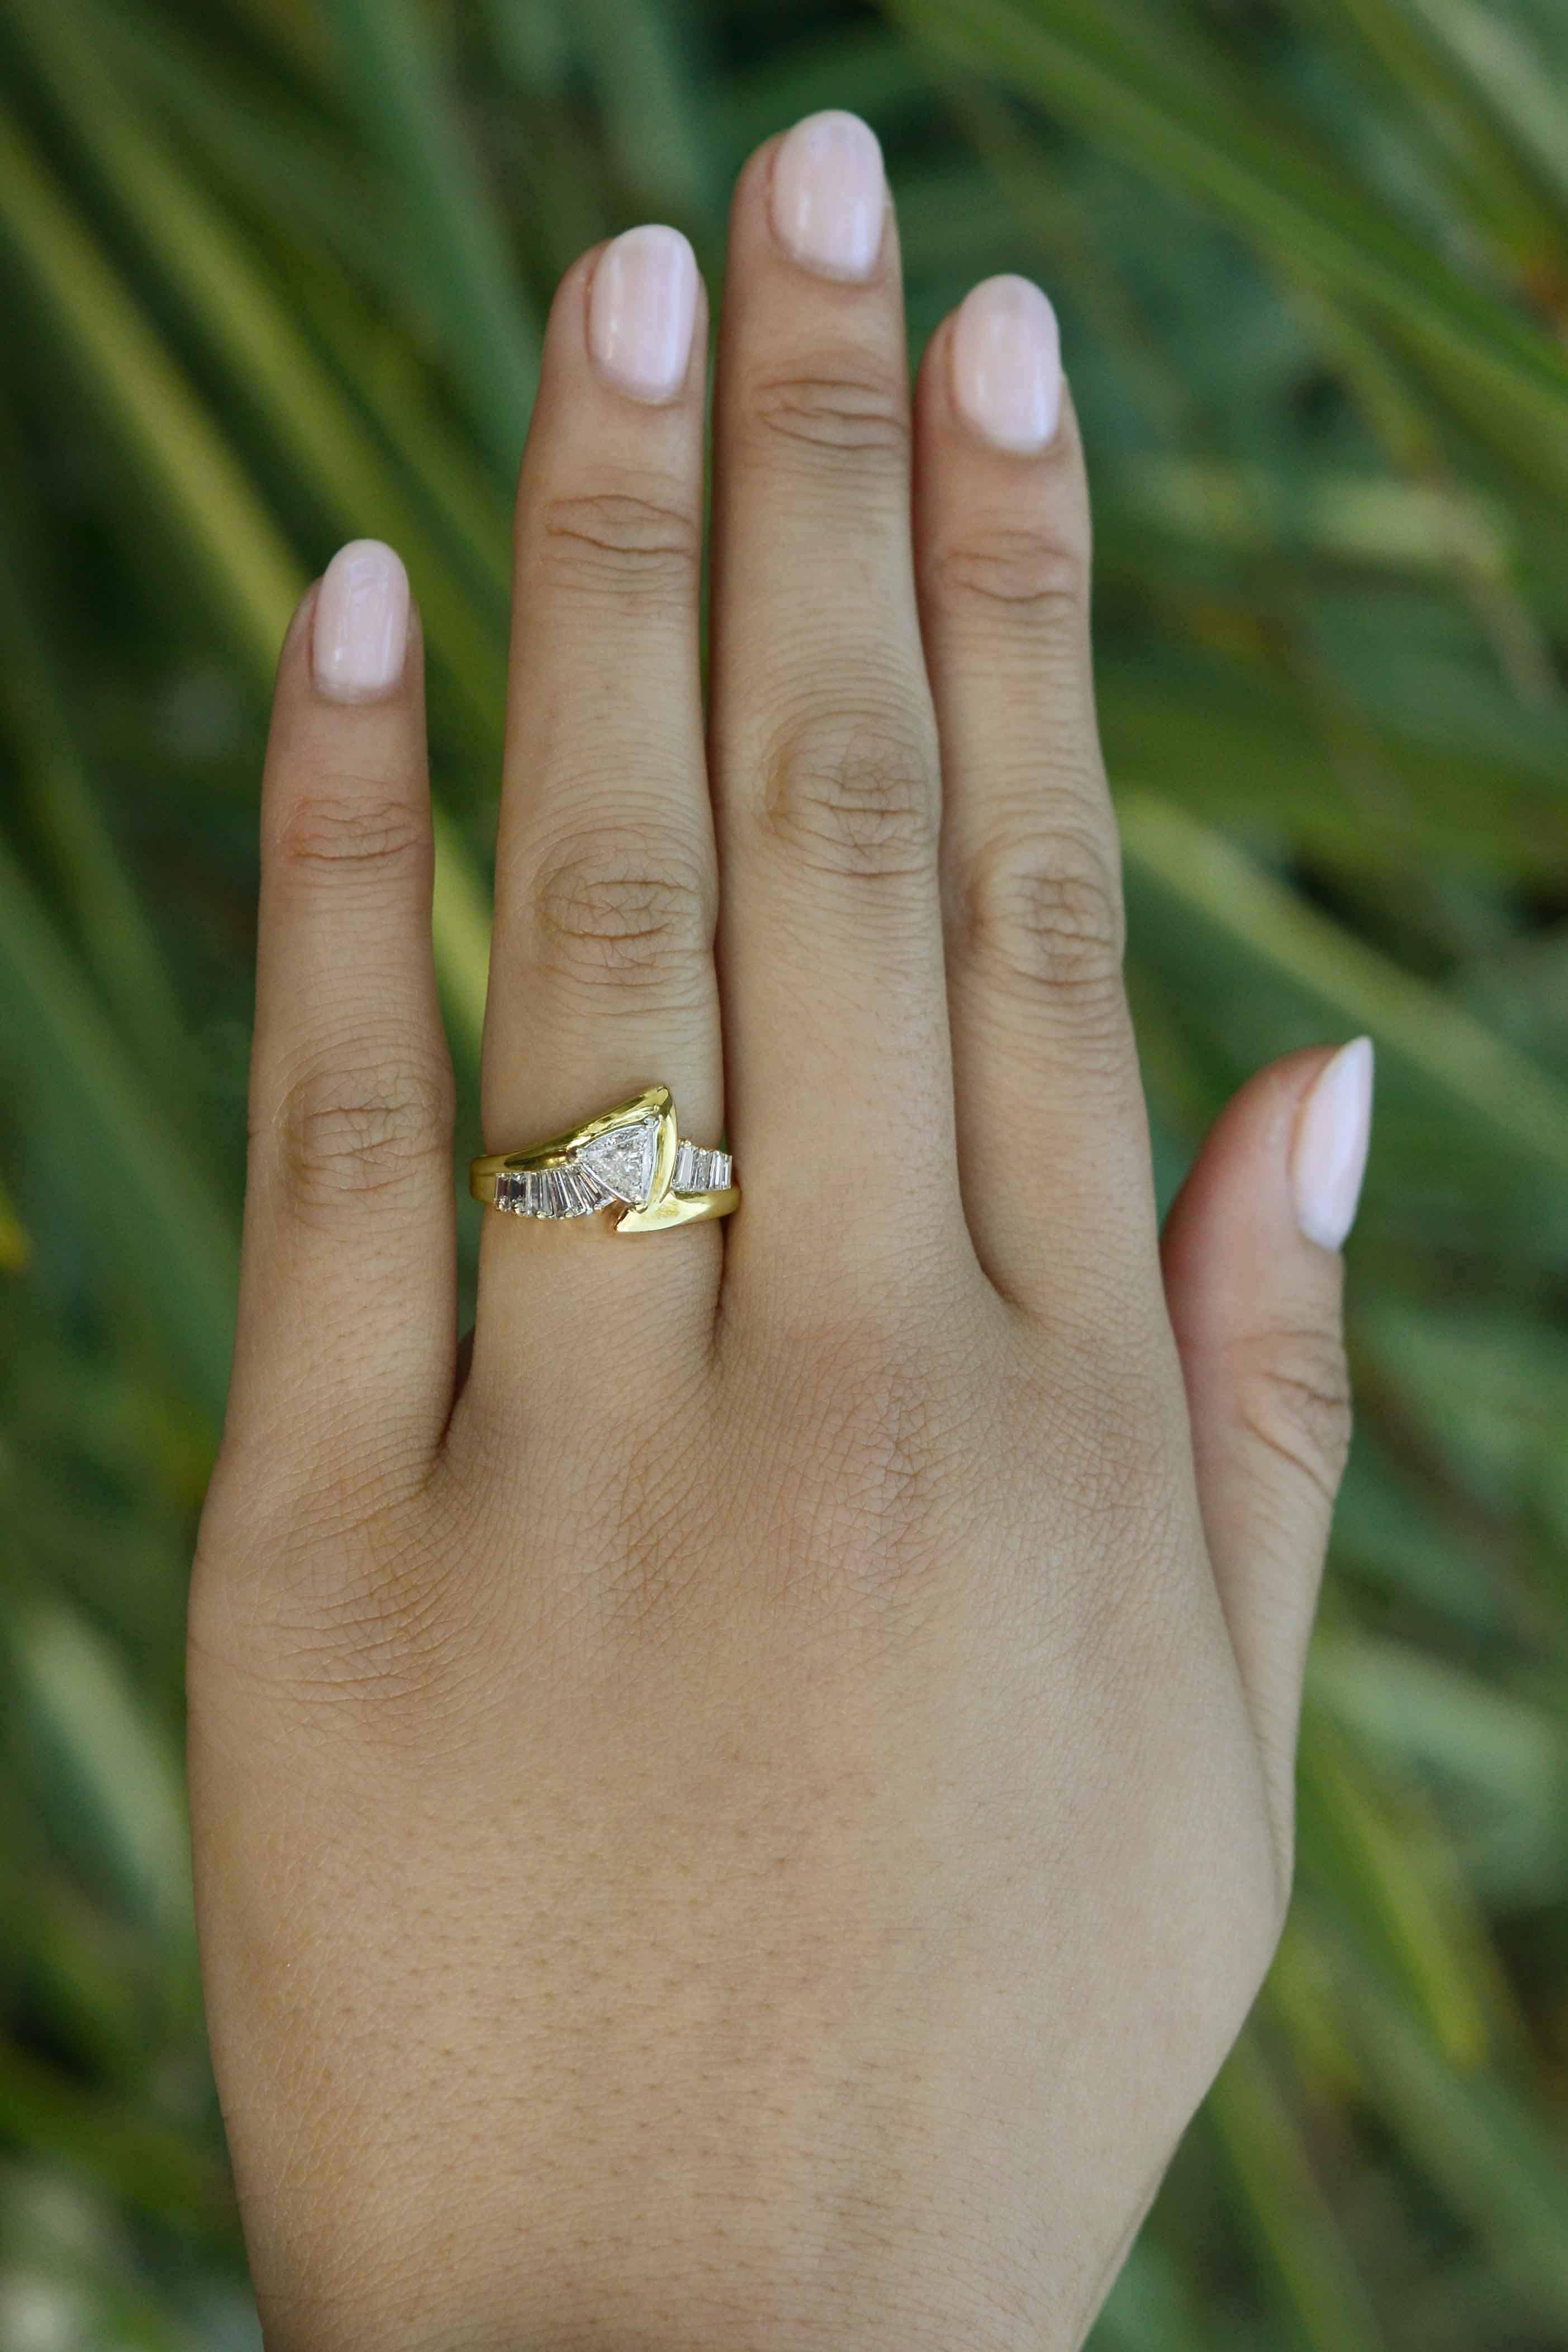 The Trekkie engagement ring of your dreams! Centered by a unique, fiery triangular shaped (trillion) diamond, this ring evokes the styling of the iconic Star Trek series with its signature yellow gold configuration flanked by tapered baguette